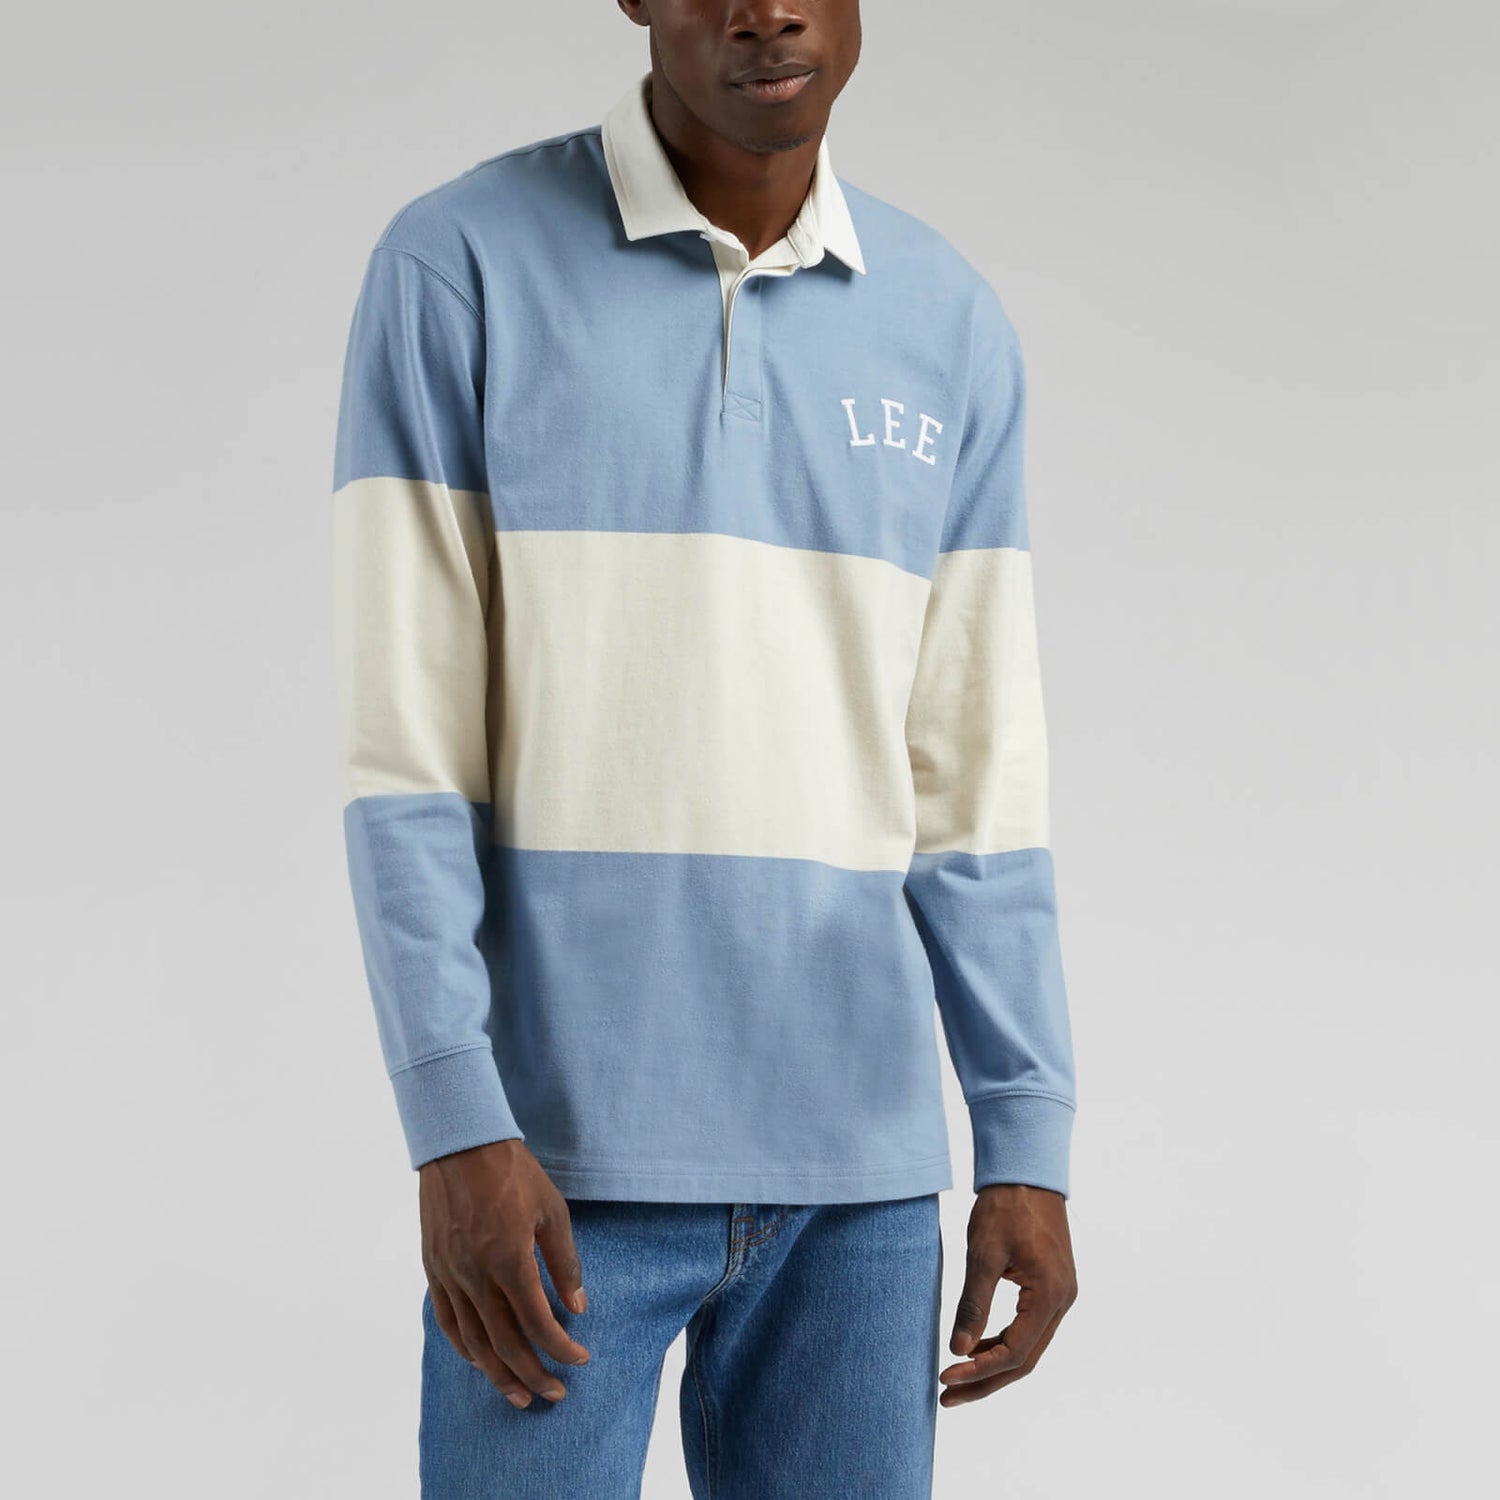 Lee Striped Cotton Rugby Top | TheHut.com